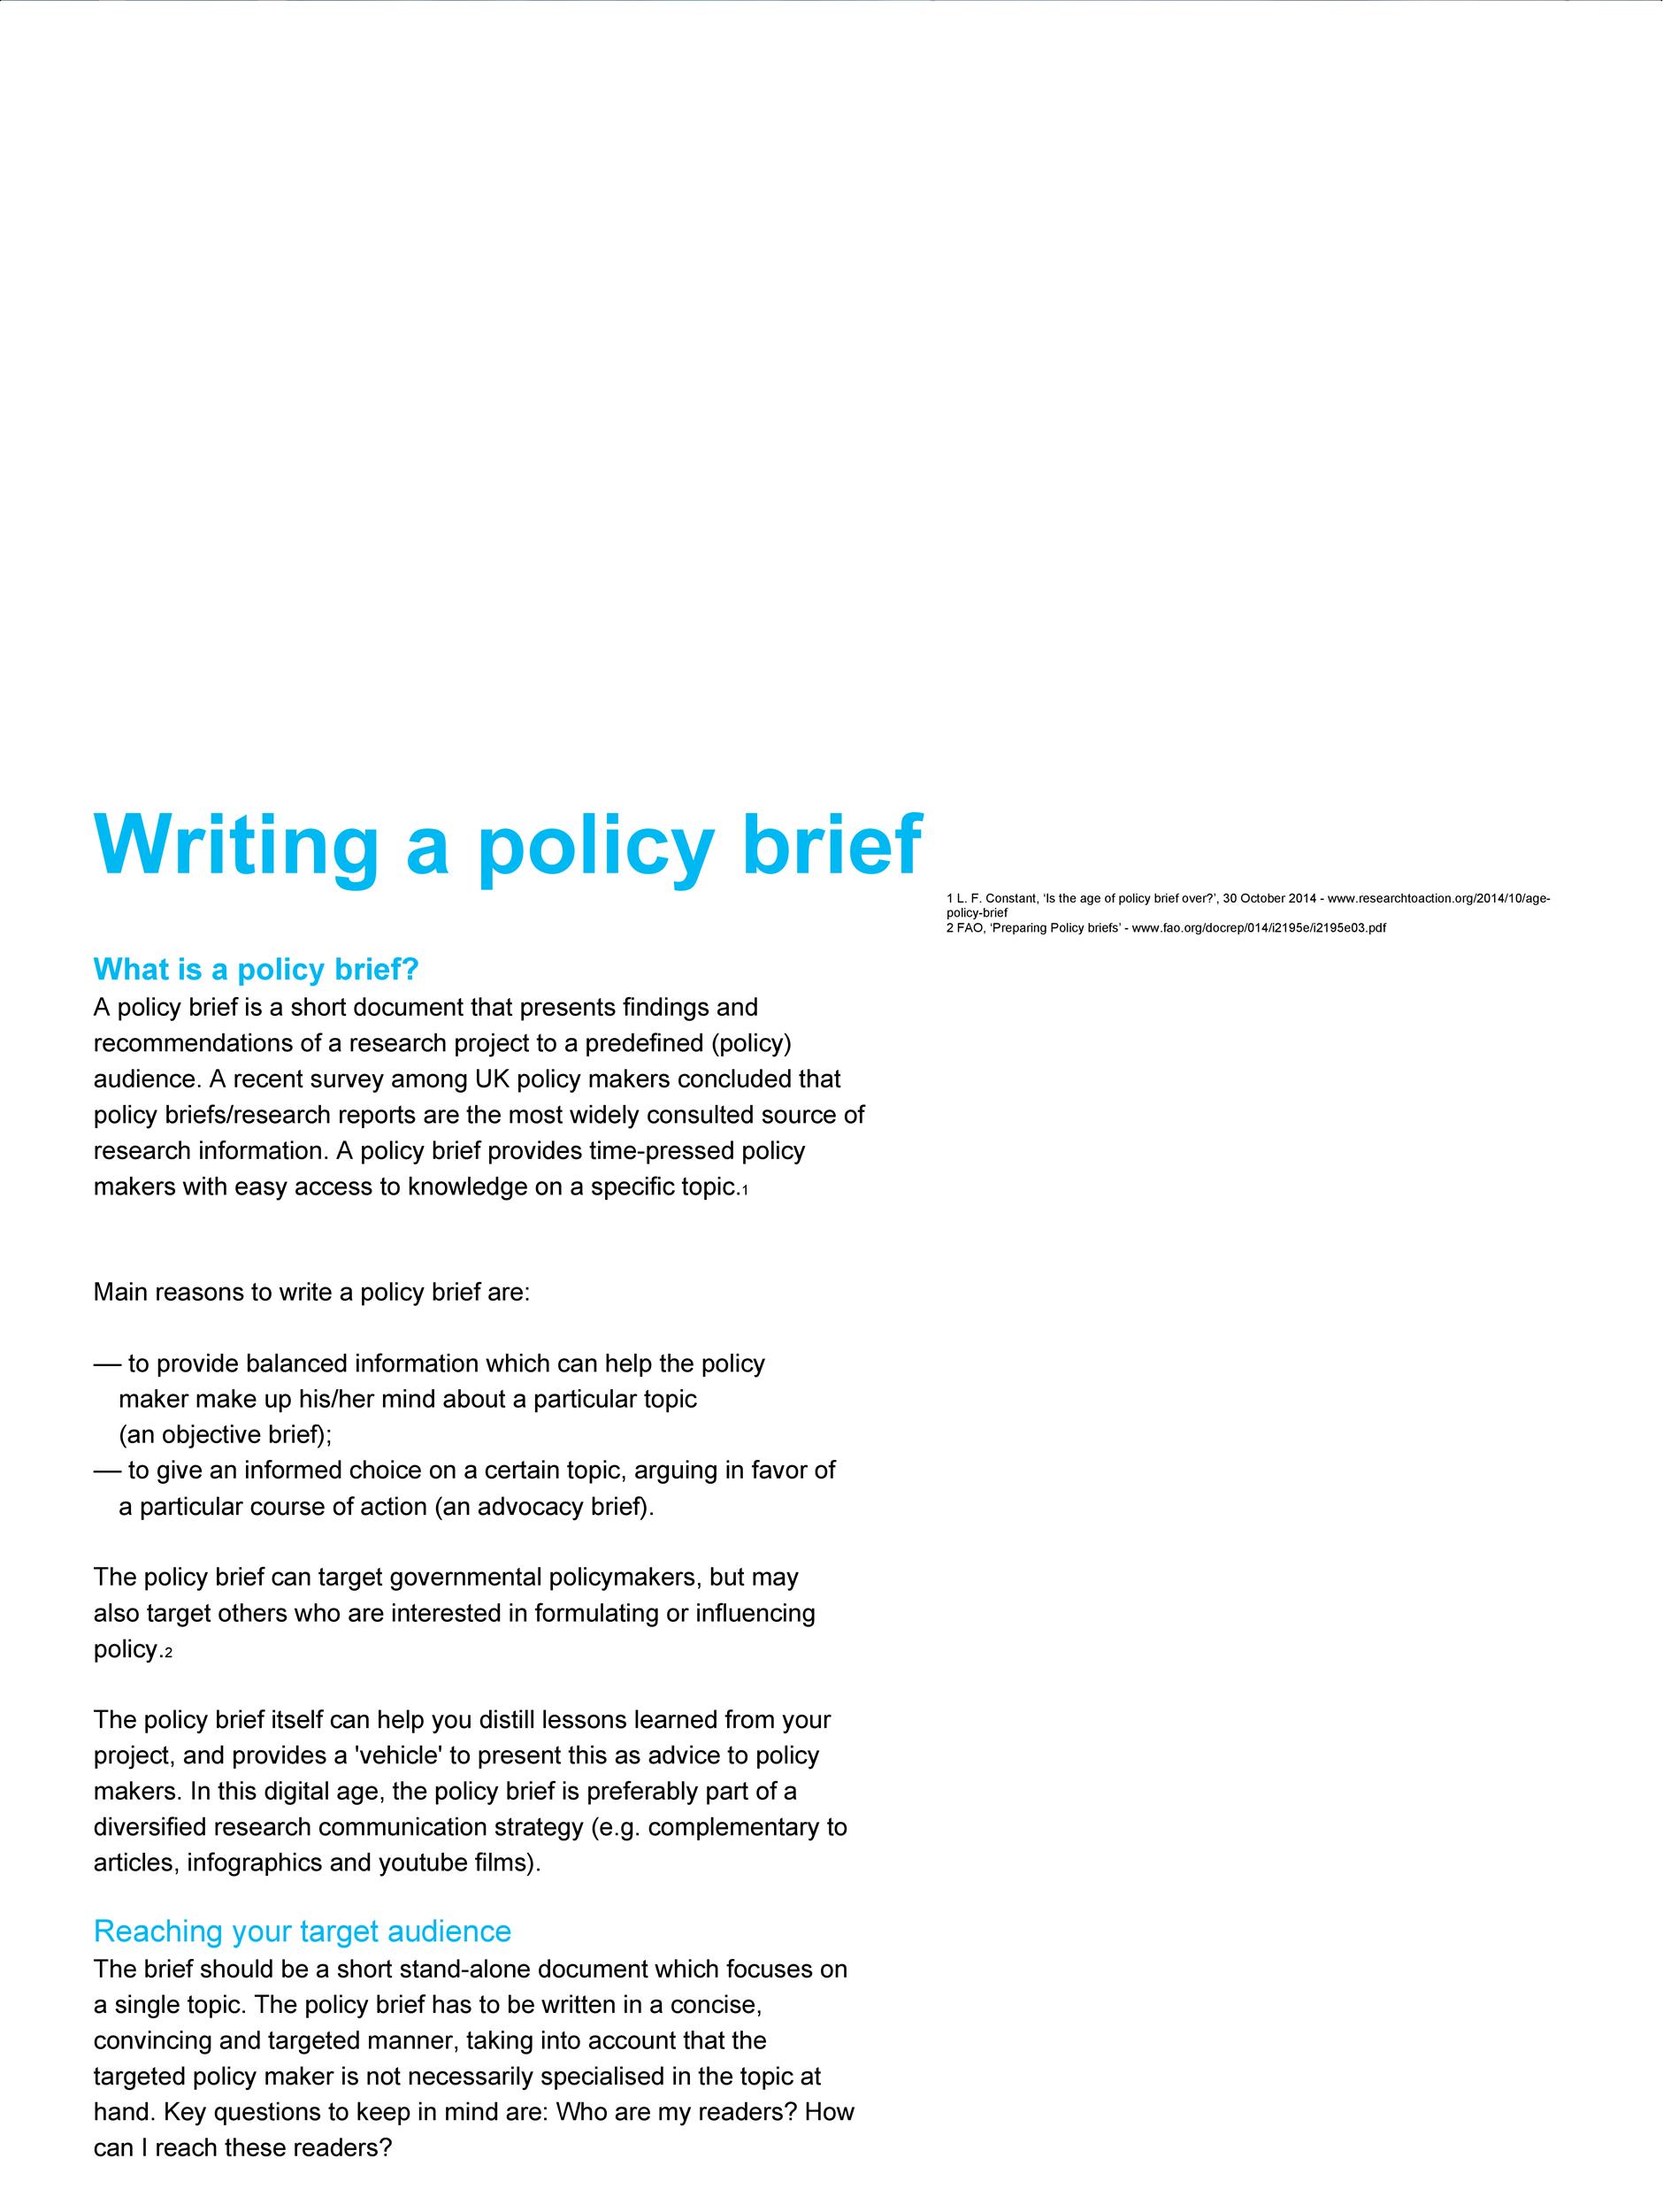 16 Free Policy Brief Templates (MS Word) ᐅ TemplateLab